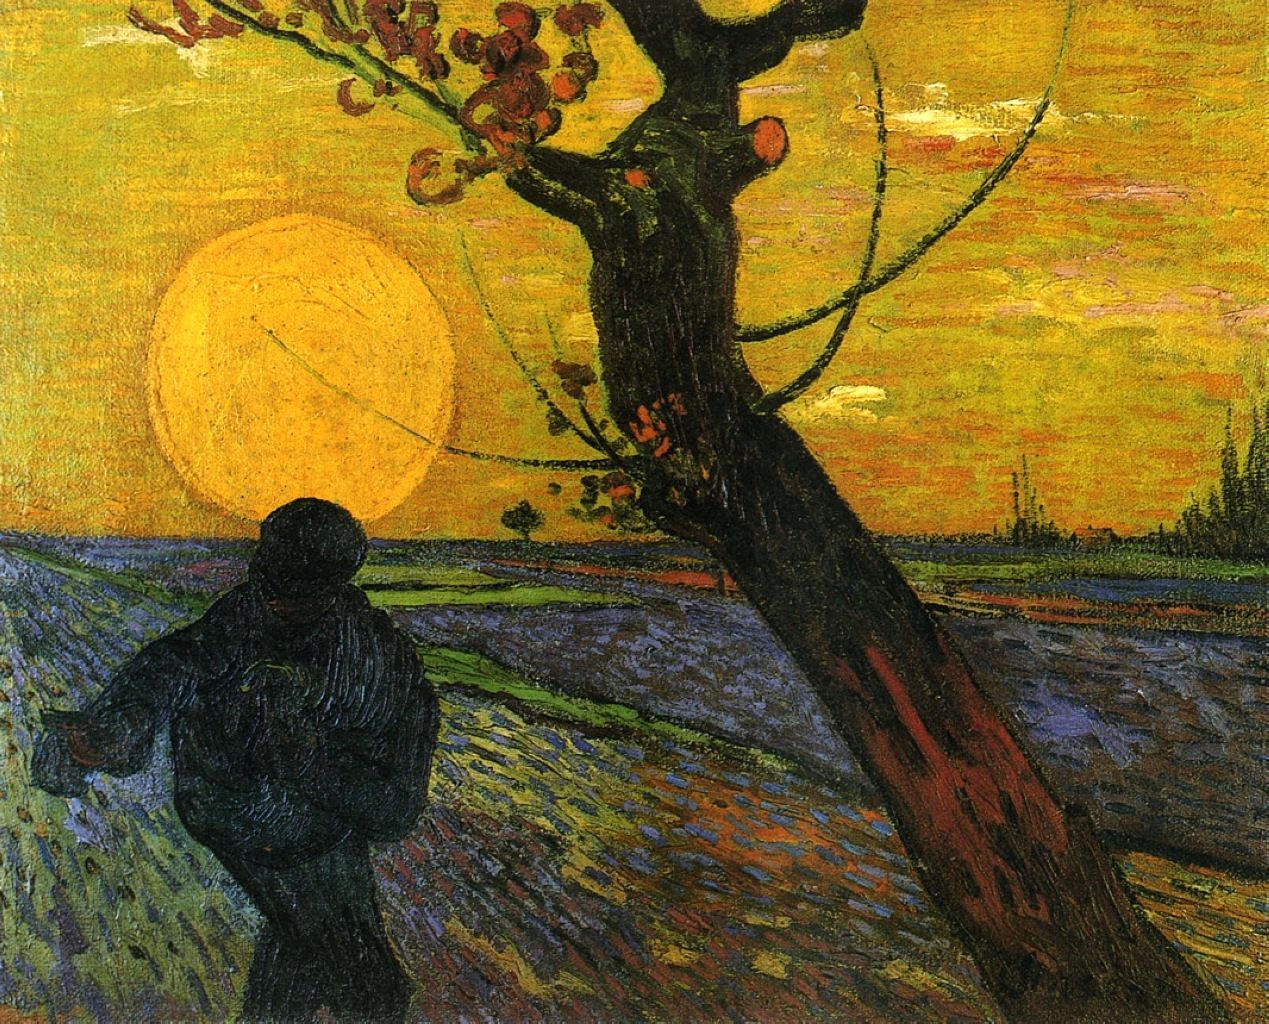 Sower with Setting Sun – Vincent van Gogh